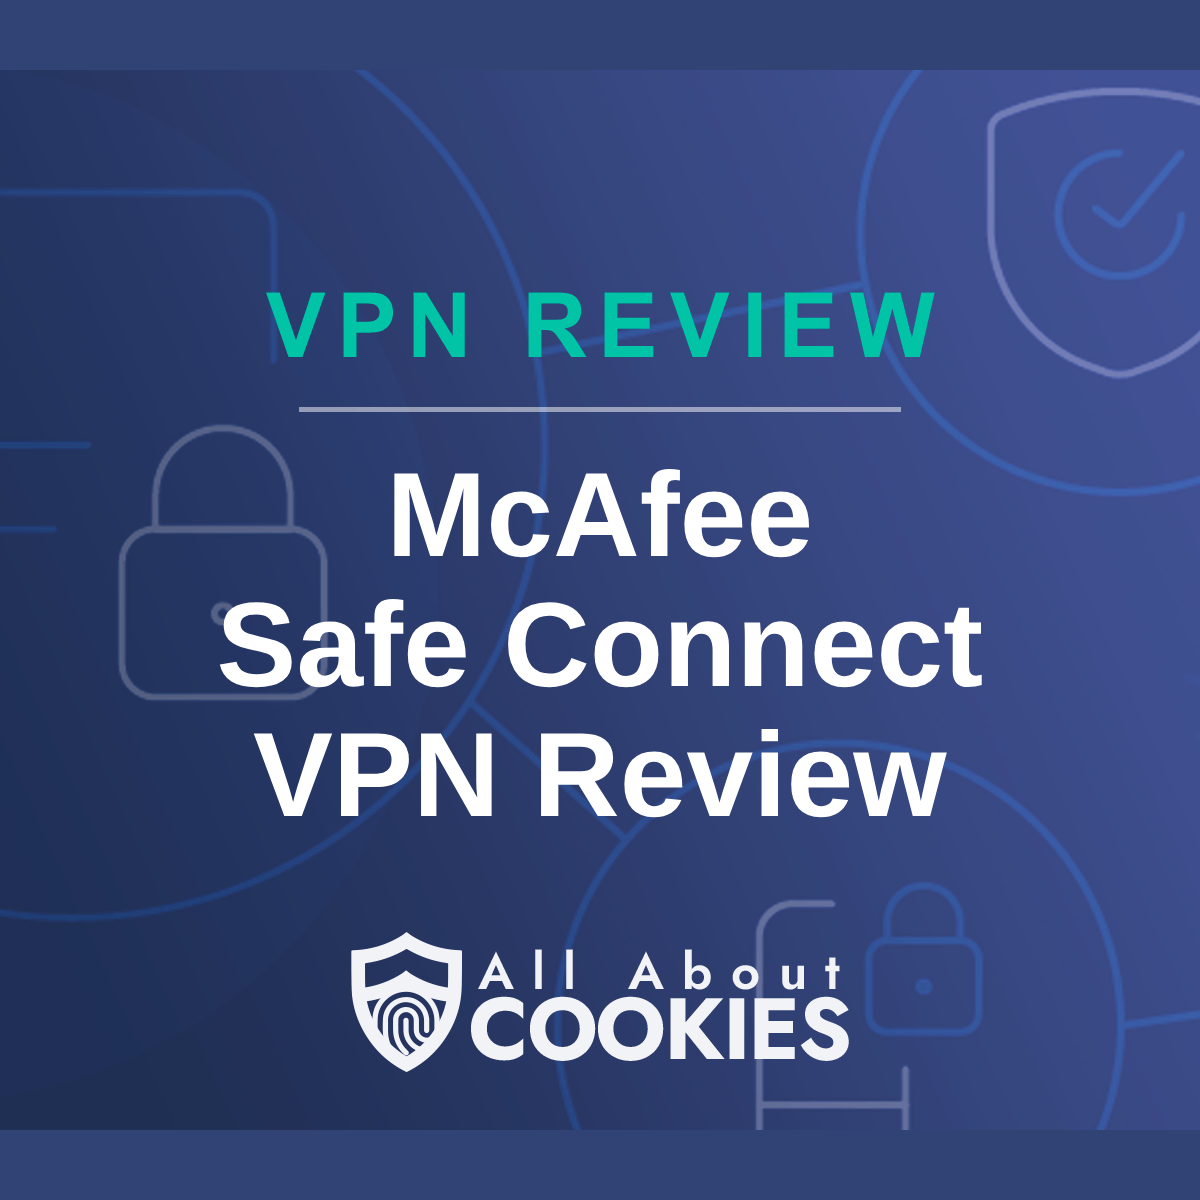 A blue background with images of locks and shields with the text &quot;McAfee Safe Connect VPN Review&quot; and the All About Cookies logo. 